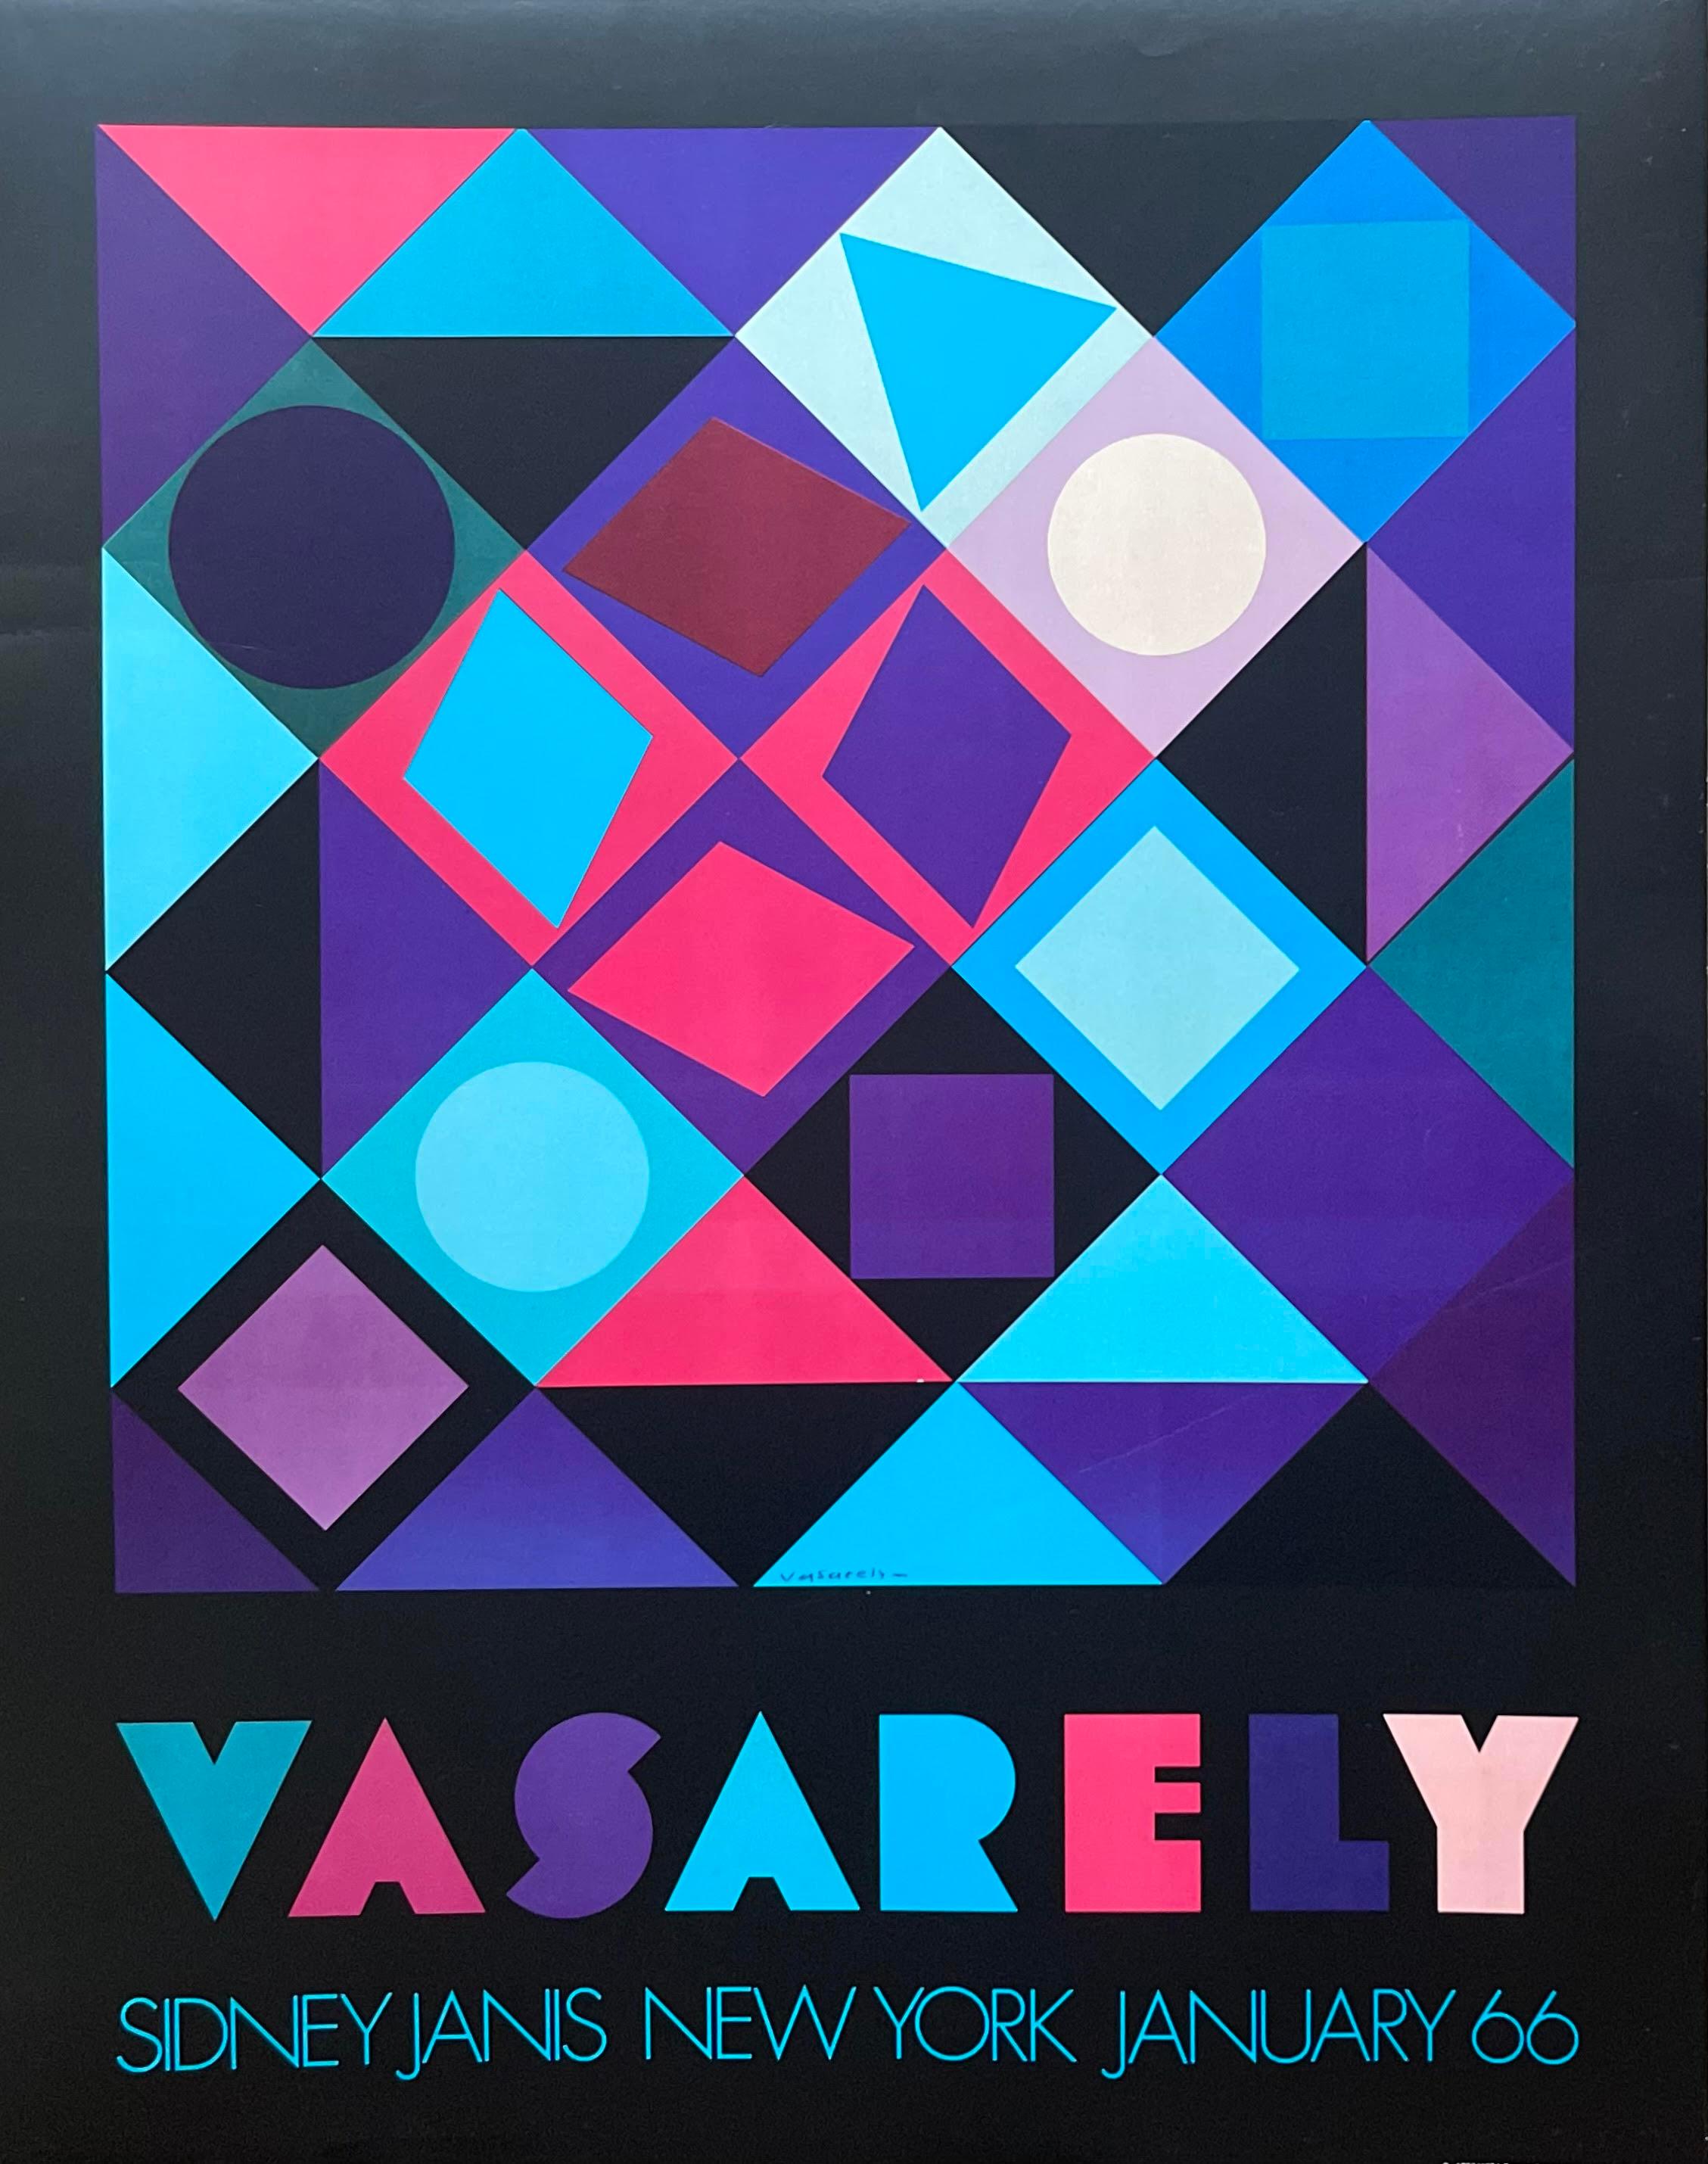 Victor Vasarely Figurative Print - Sidney Janis Gallery Exhibition Poster